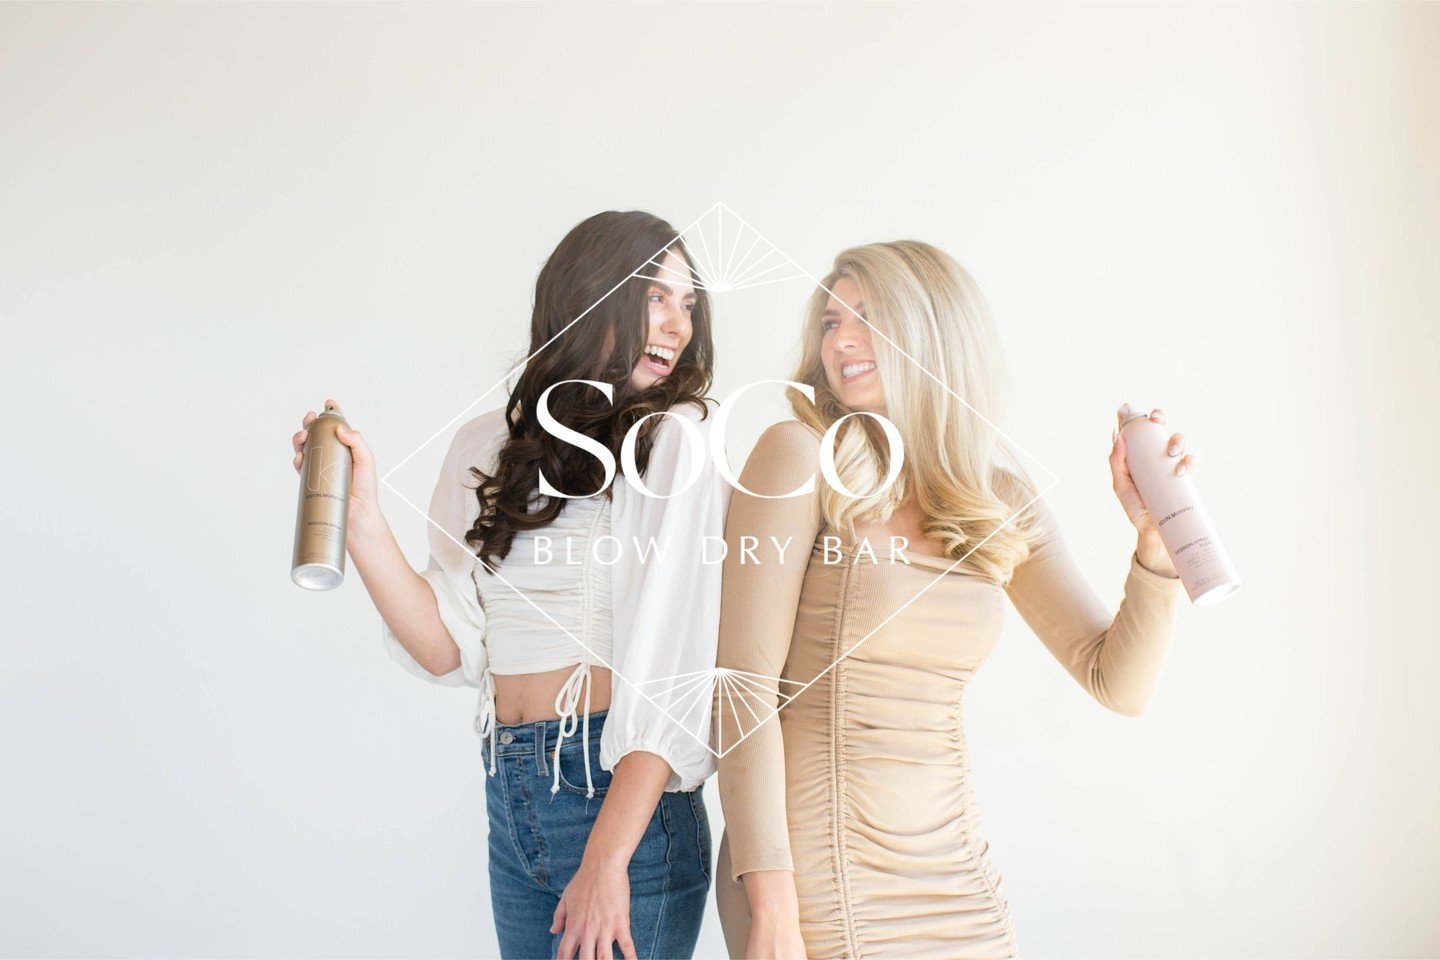 Weddings, galas, date nights, or just because it's a Tuesday&mdash;it&rsquo;s always a good day for a blowout at SoCo Blow Dry Bar! 💁&zwj;♀️✨ 

Whether you&rsquo;re stepping out for a special occasion or just want to add a little extra sparkle to yo